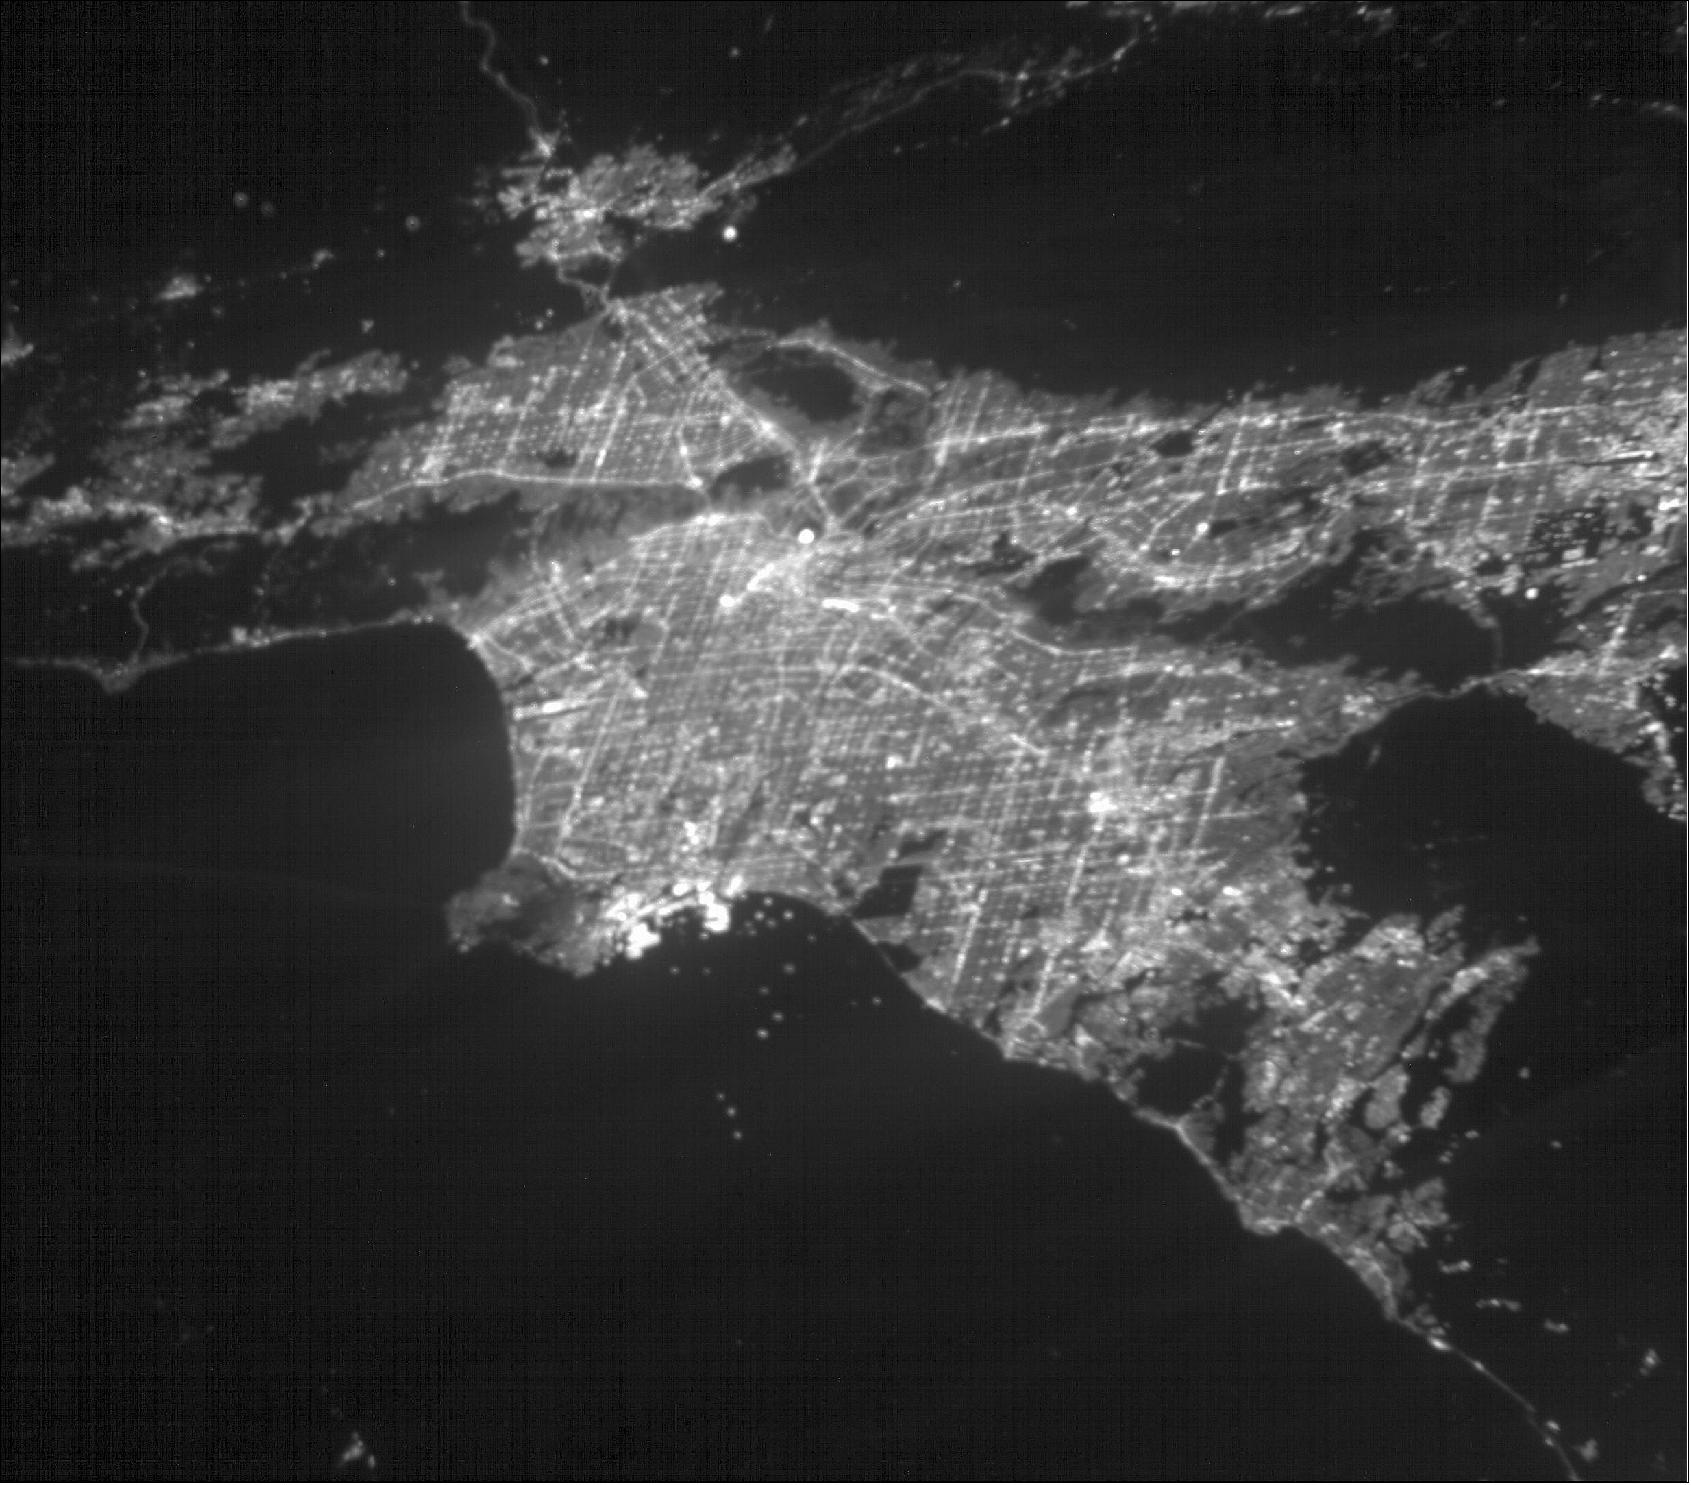 Figure 9: This image of the greater Los Angeles area was taken on March 29, 2019, by ASTERIA. The Port of Long Beach is visible near the center of the image (image credit: NASA/JPL, Caltech)